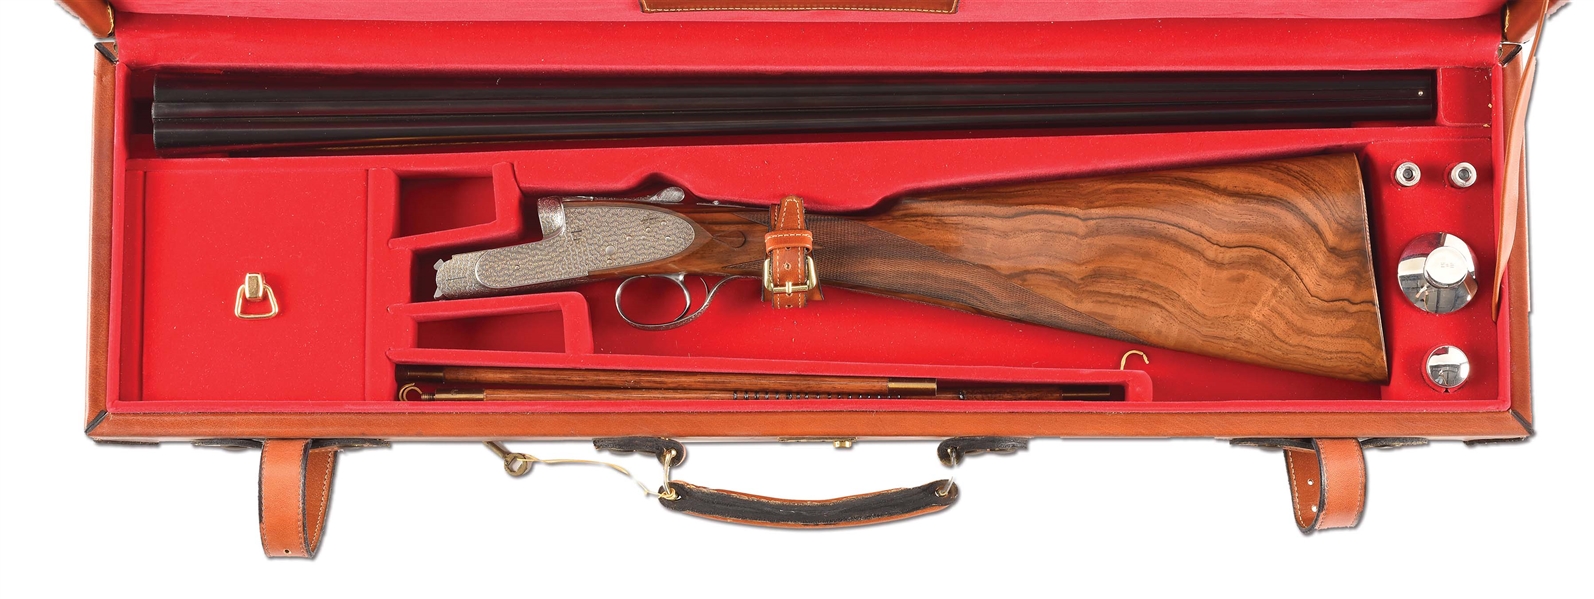 (M) GORGEOUS FAMARS ABBIATICO & SALVINELLI "VENERE EXTRA" .410 BORE SIDE BY SIDE SHOTGUN ENGRAVED AND GOLD INLAID BY SABATTI WITH CASE.